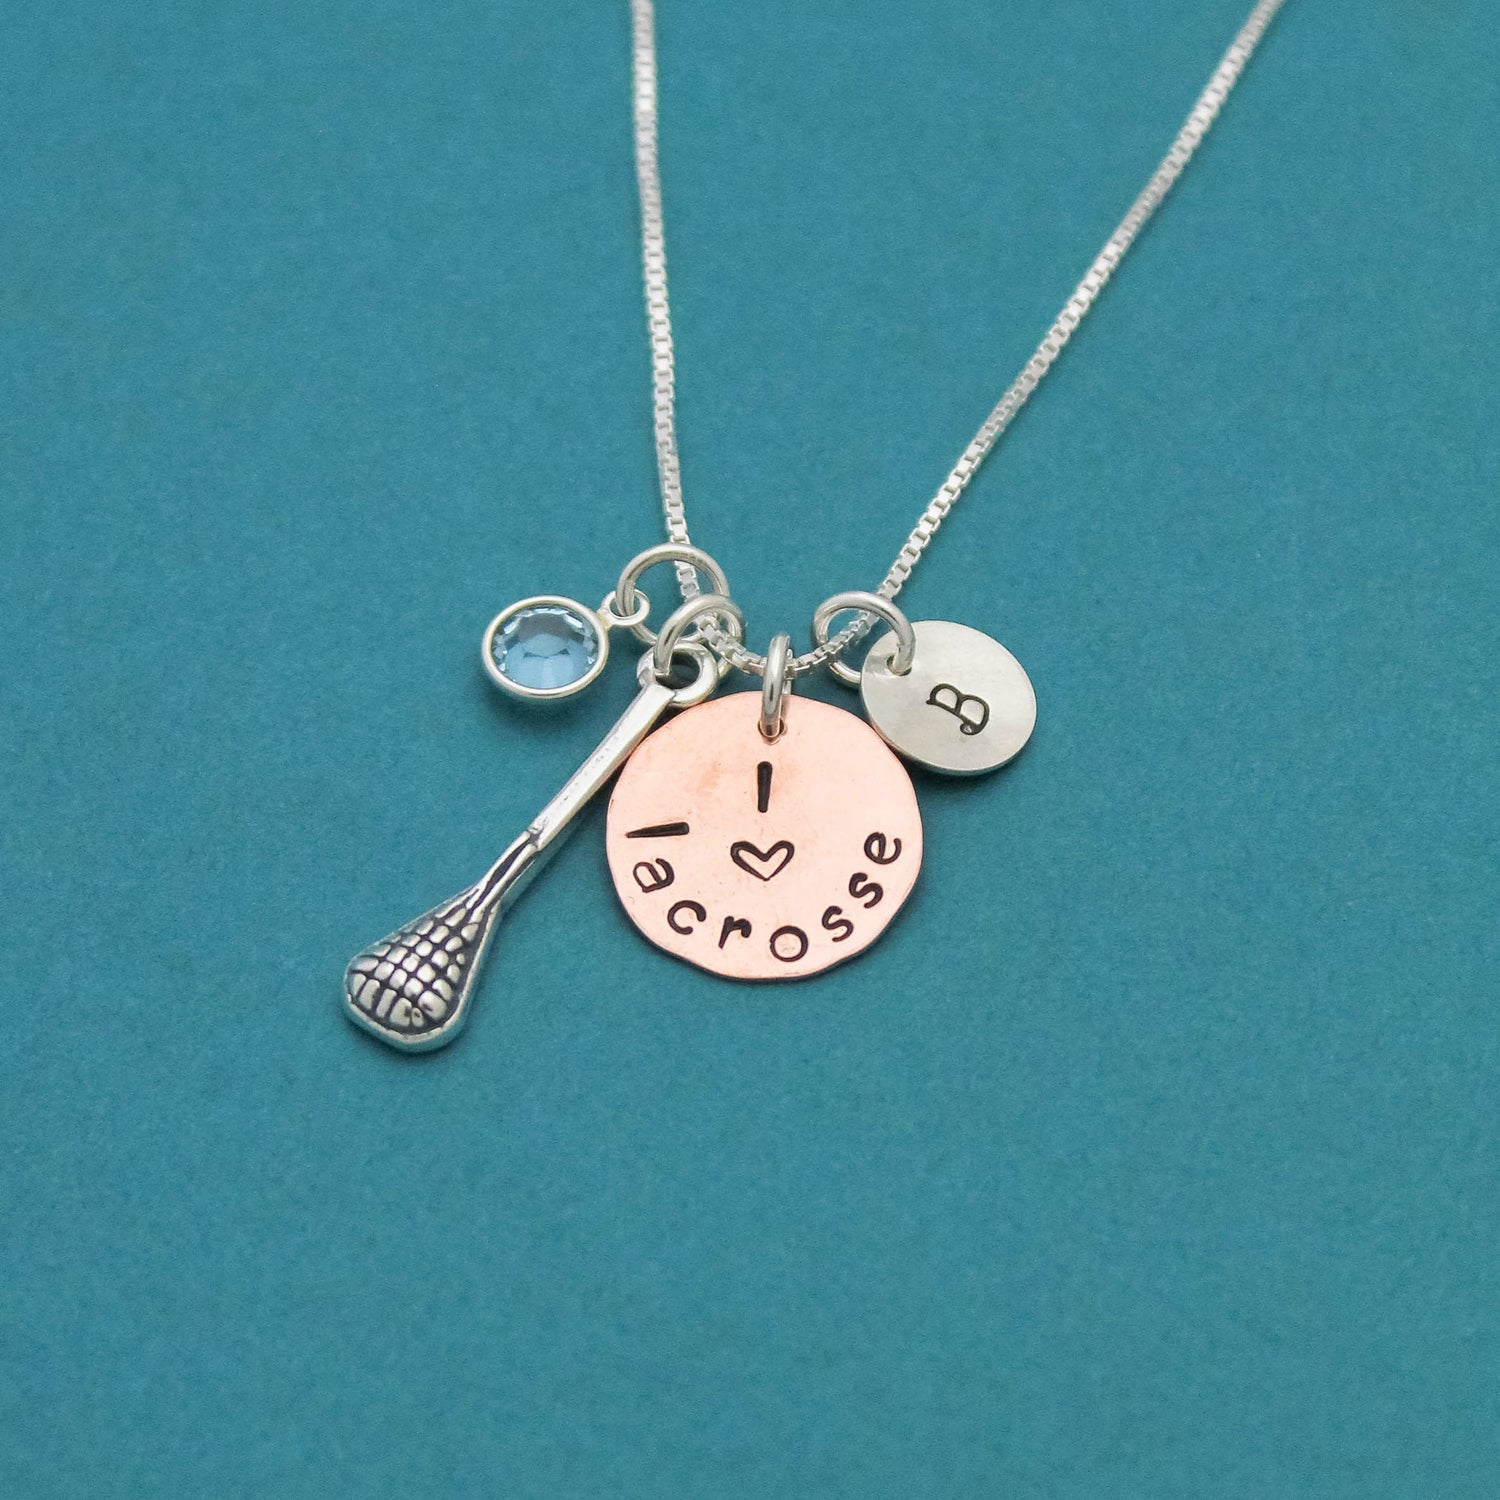 Lacrosse Necklace, Field Hockey Necklace, Running Necklace, Dance Necklace, Tennis Neckalce, Music Necklace Drama, Personalized Hand Stamped